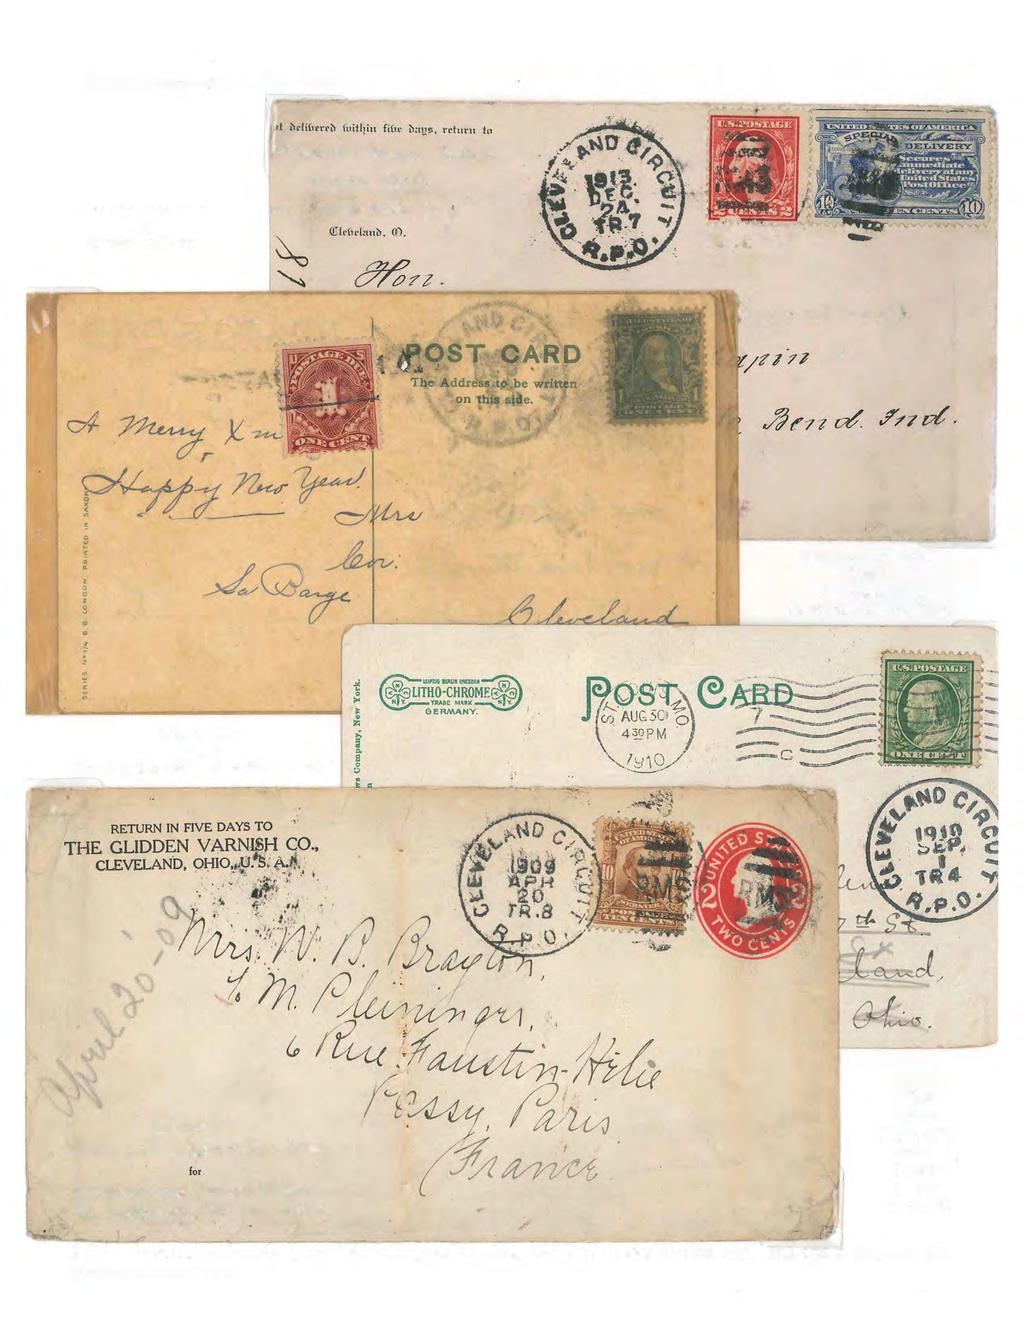 Handstamp-First Die Uses December 24, 19 13 Trip 7 Special Delivery lfili;:ahdq's ontmt atfiolii.: c f ast!ar <'.!Hrnrr:q 9016 ;maduitie onb-, /}&.